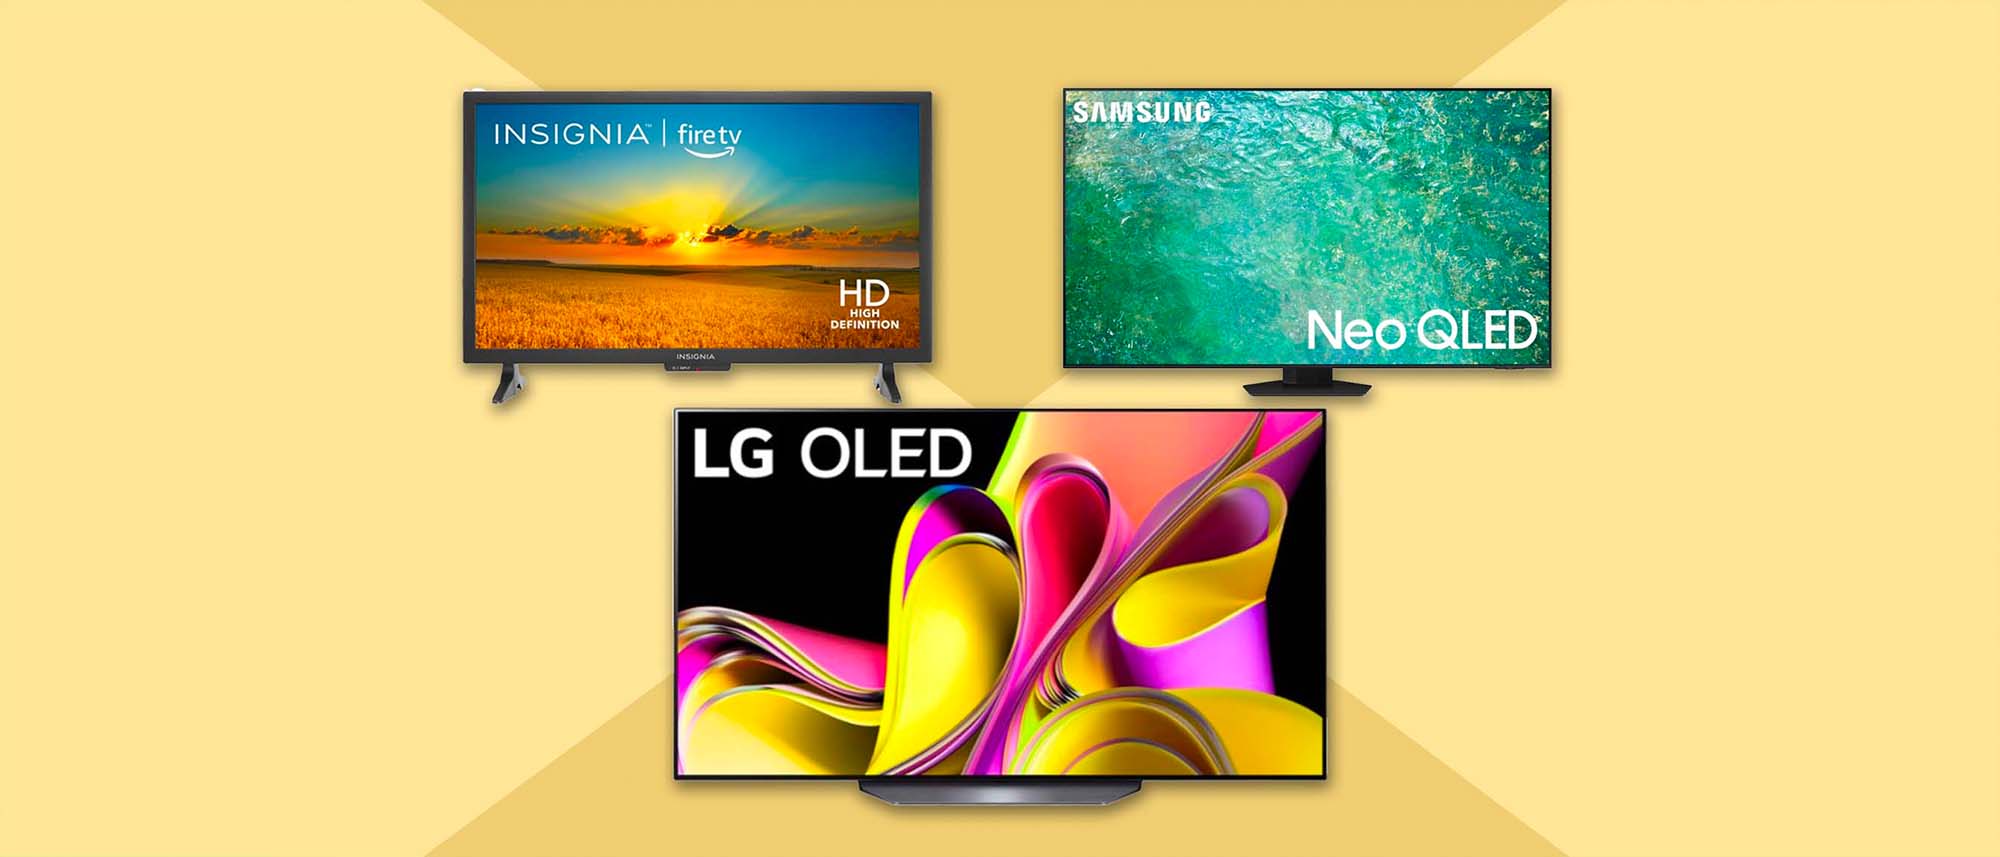 Image of three TVs including Samsung and LG